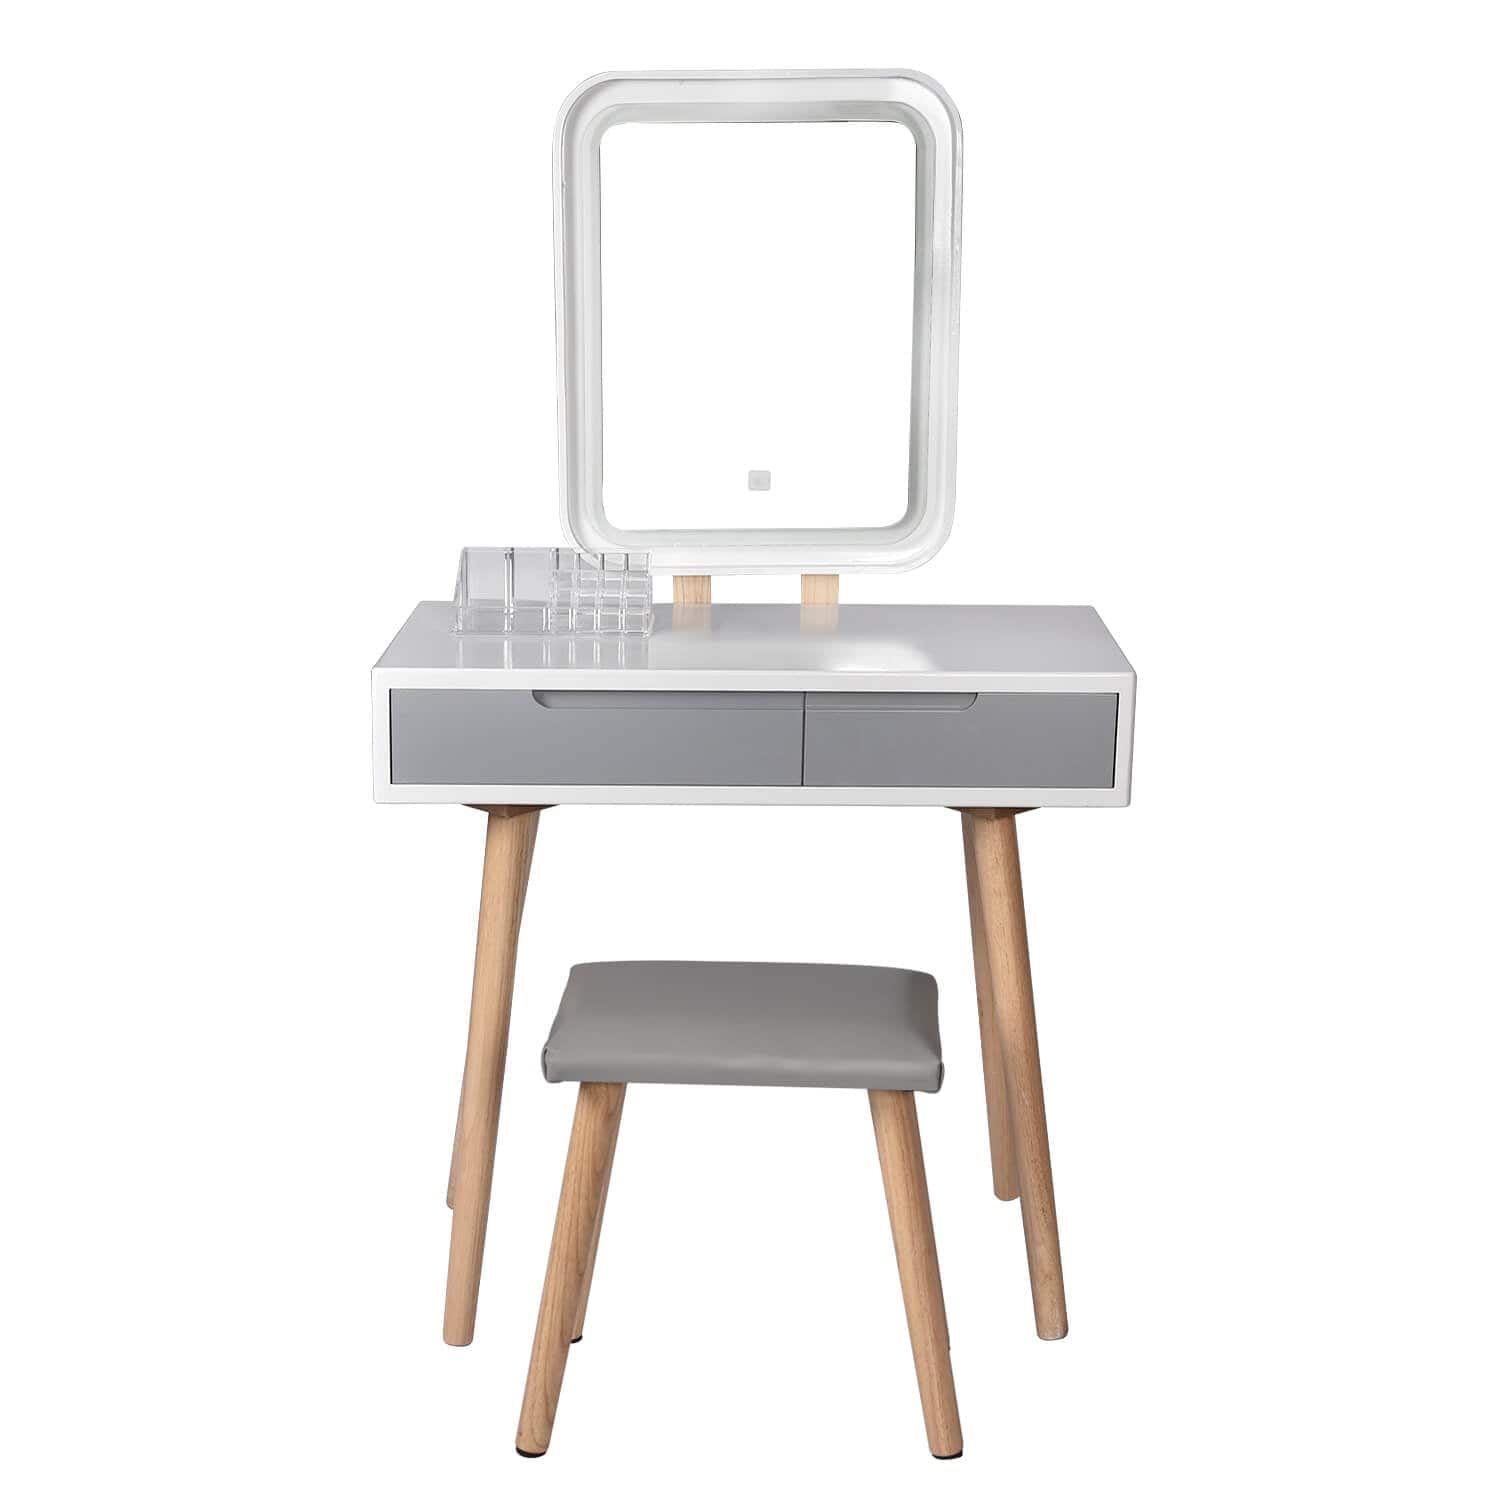 Elecwish makeup dressing table set with square mirror